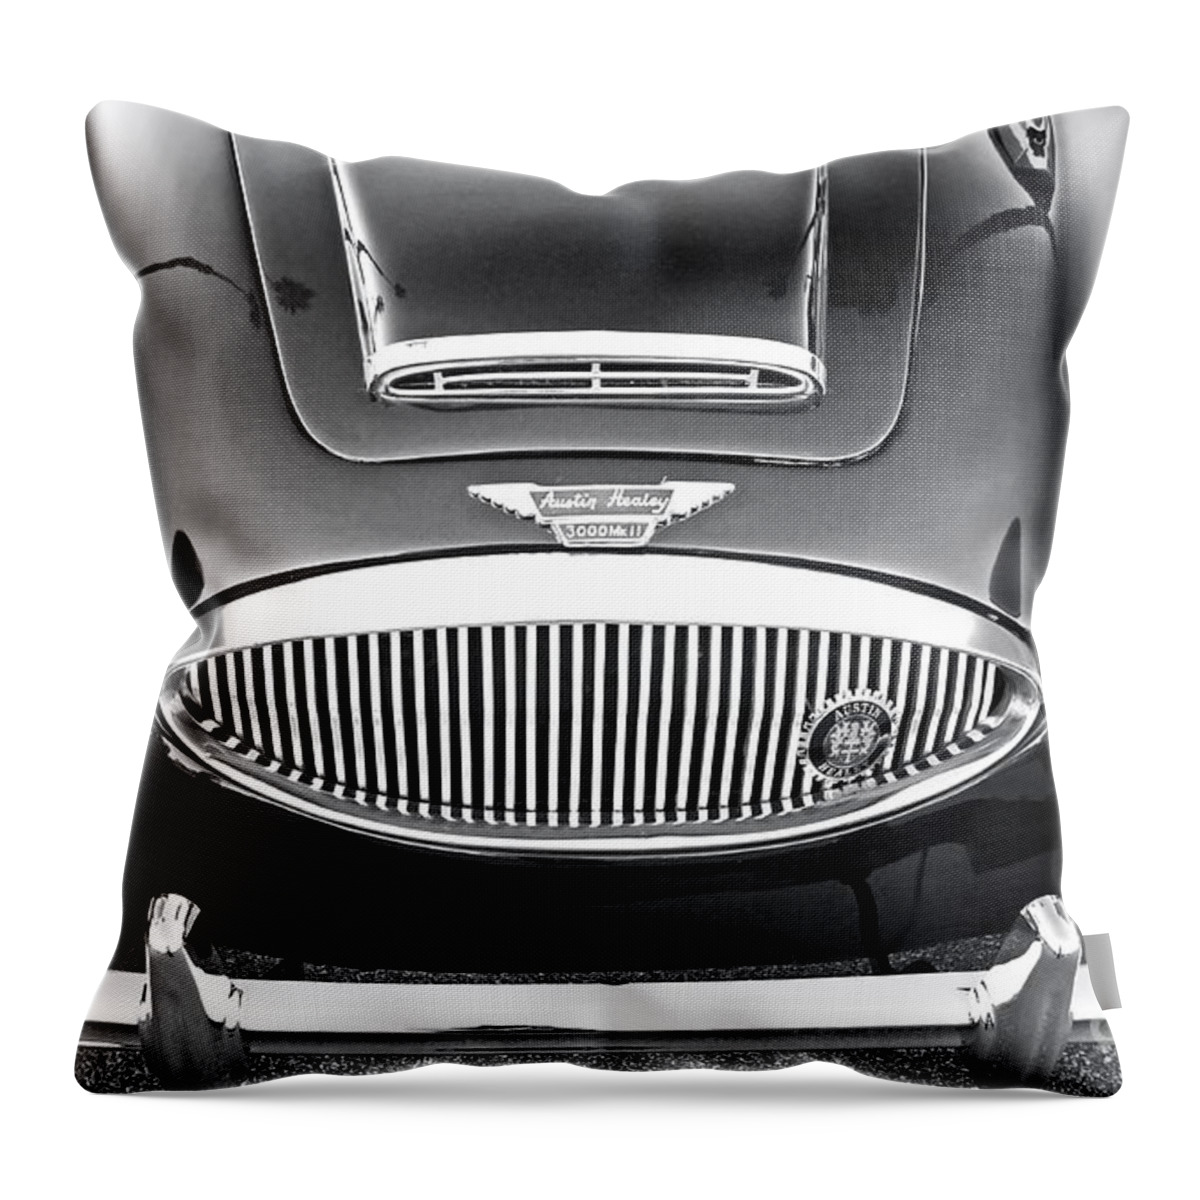 1961 Austin Healey Throw Pillow featuring the photograph 1961 Austin Healey 3000 by Gwyn Newcombe